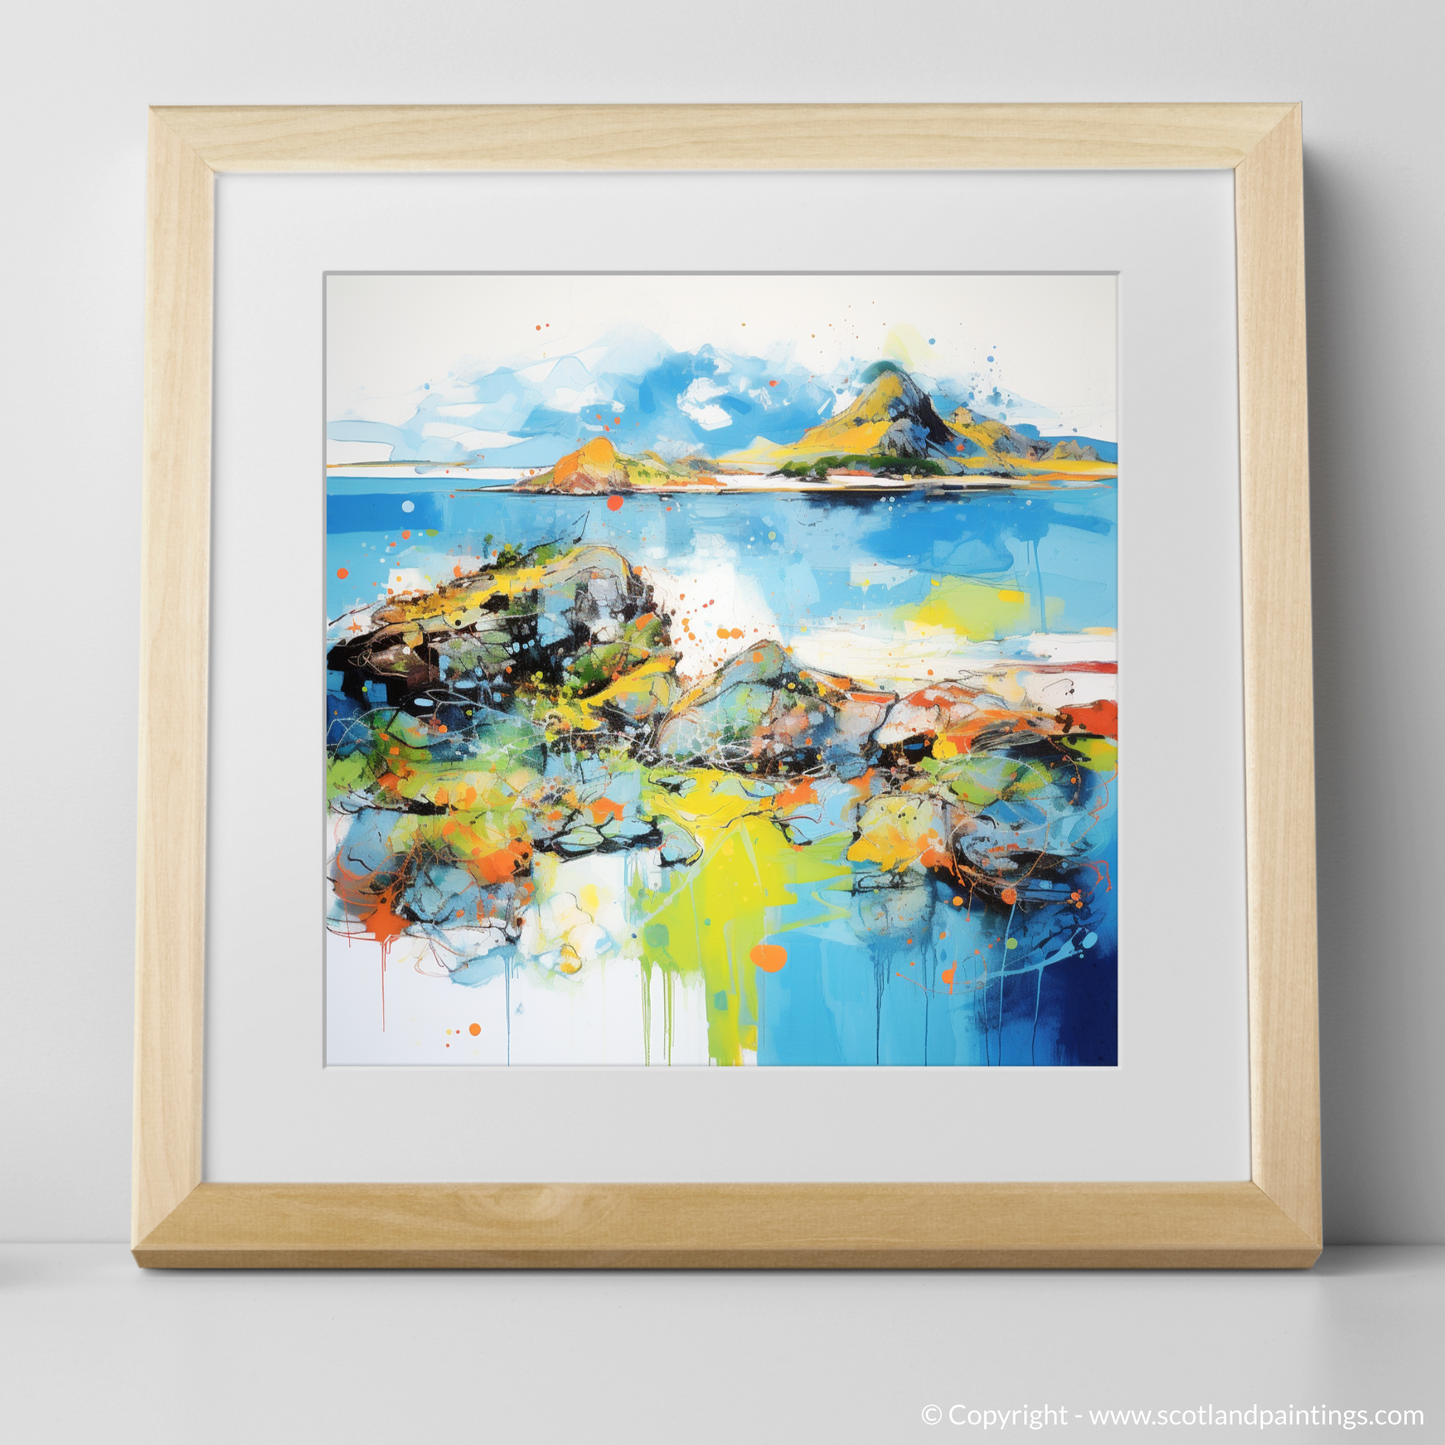 Art Print of Isle of Ulva, Inner Hebrides in summer with a natural frame